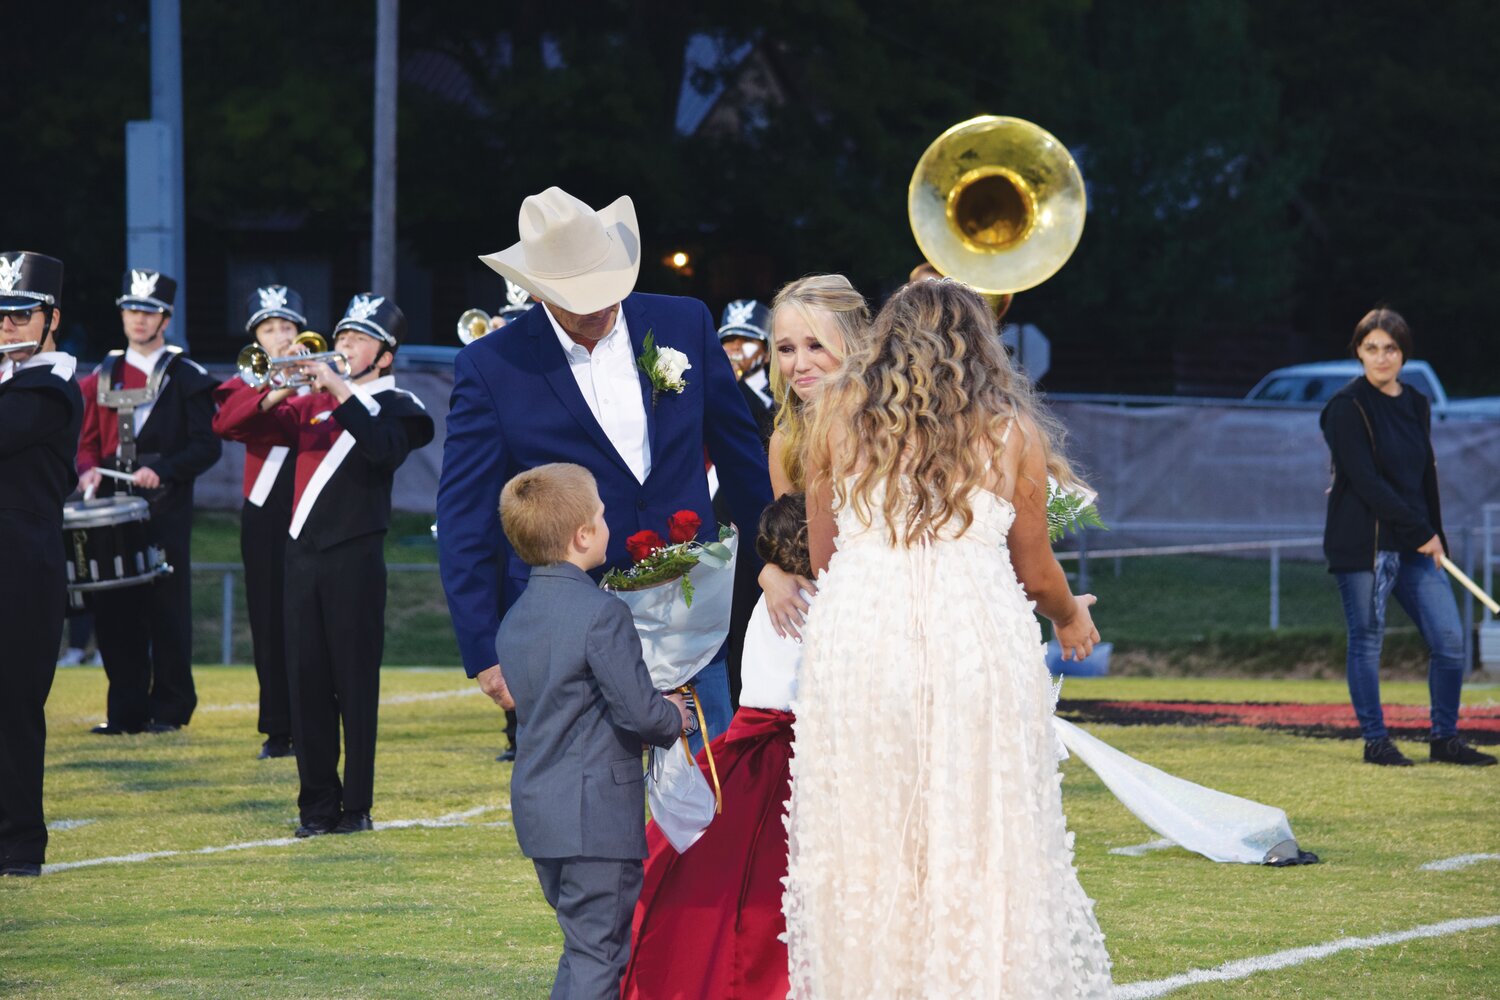 Returning 2022 Homecoming Queen, Savannah Villines, crowned Faith, with junior escorts Clayton Comer and Mallorie Thomas looking on.